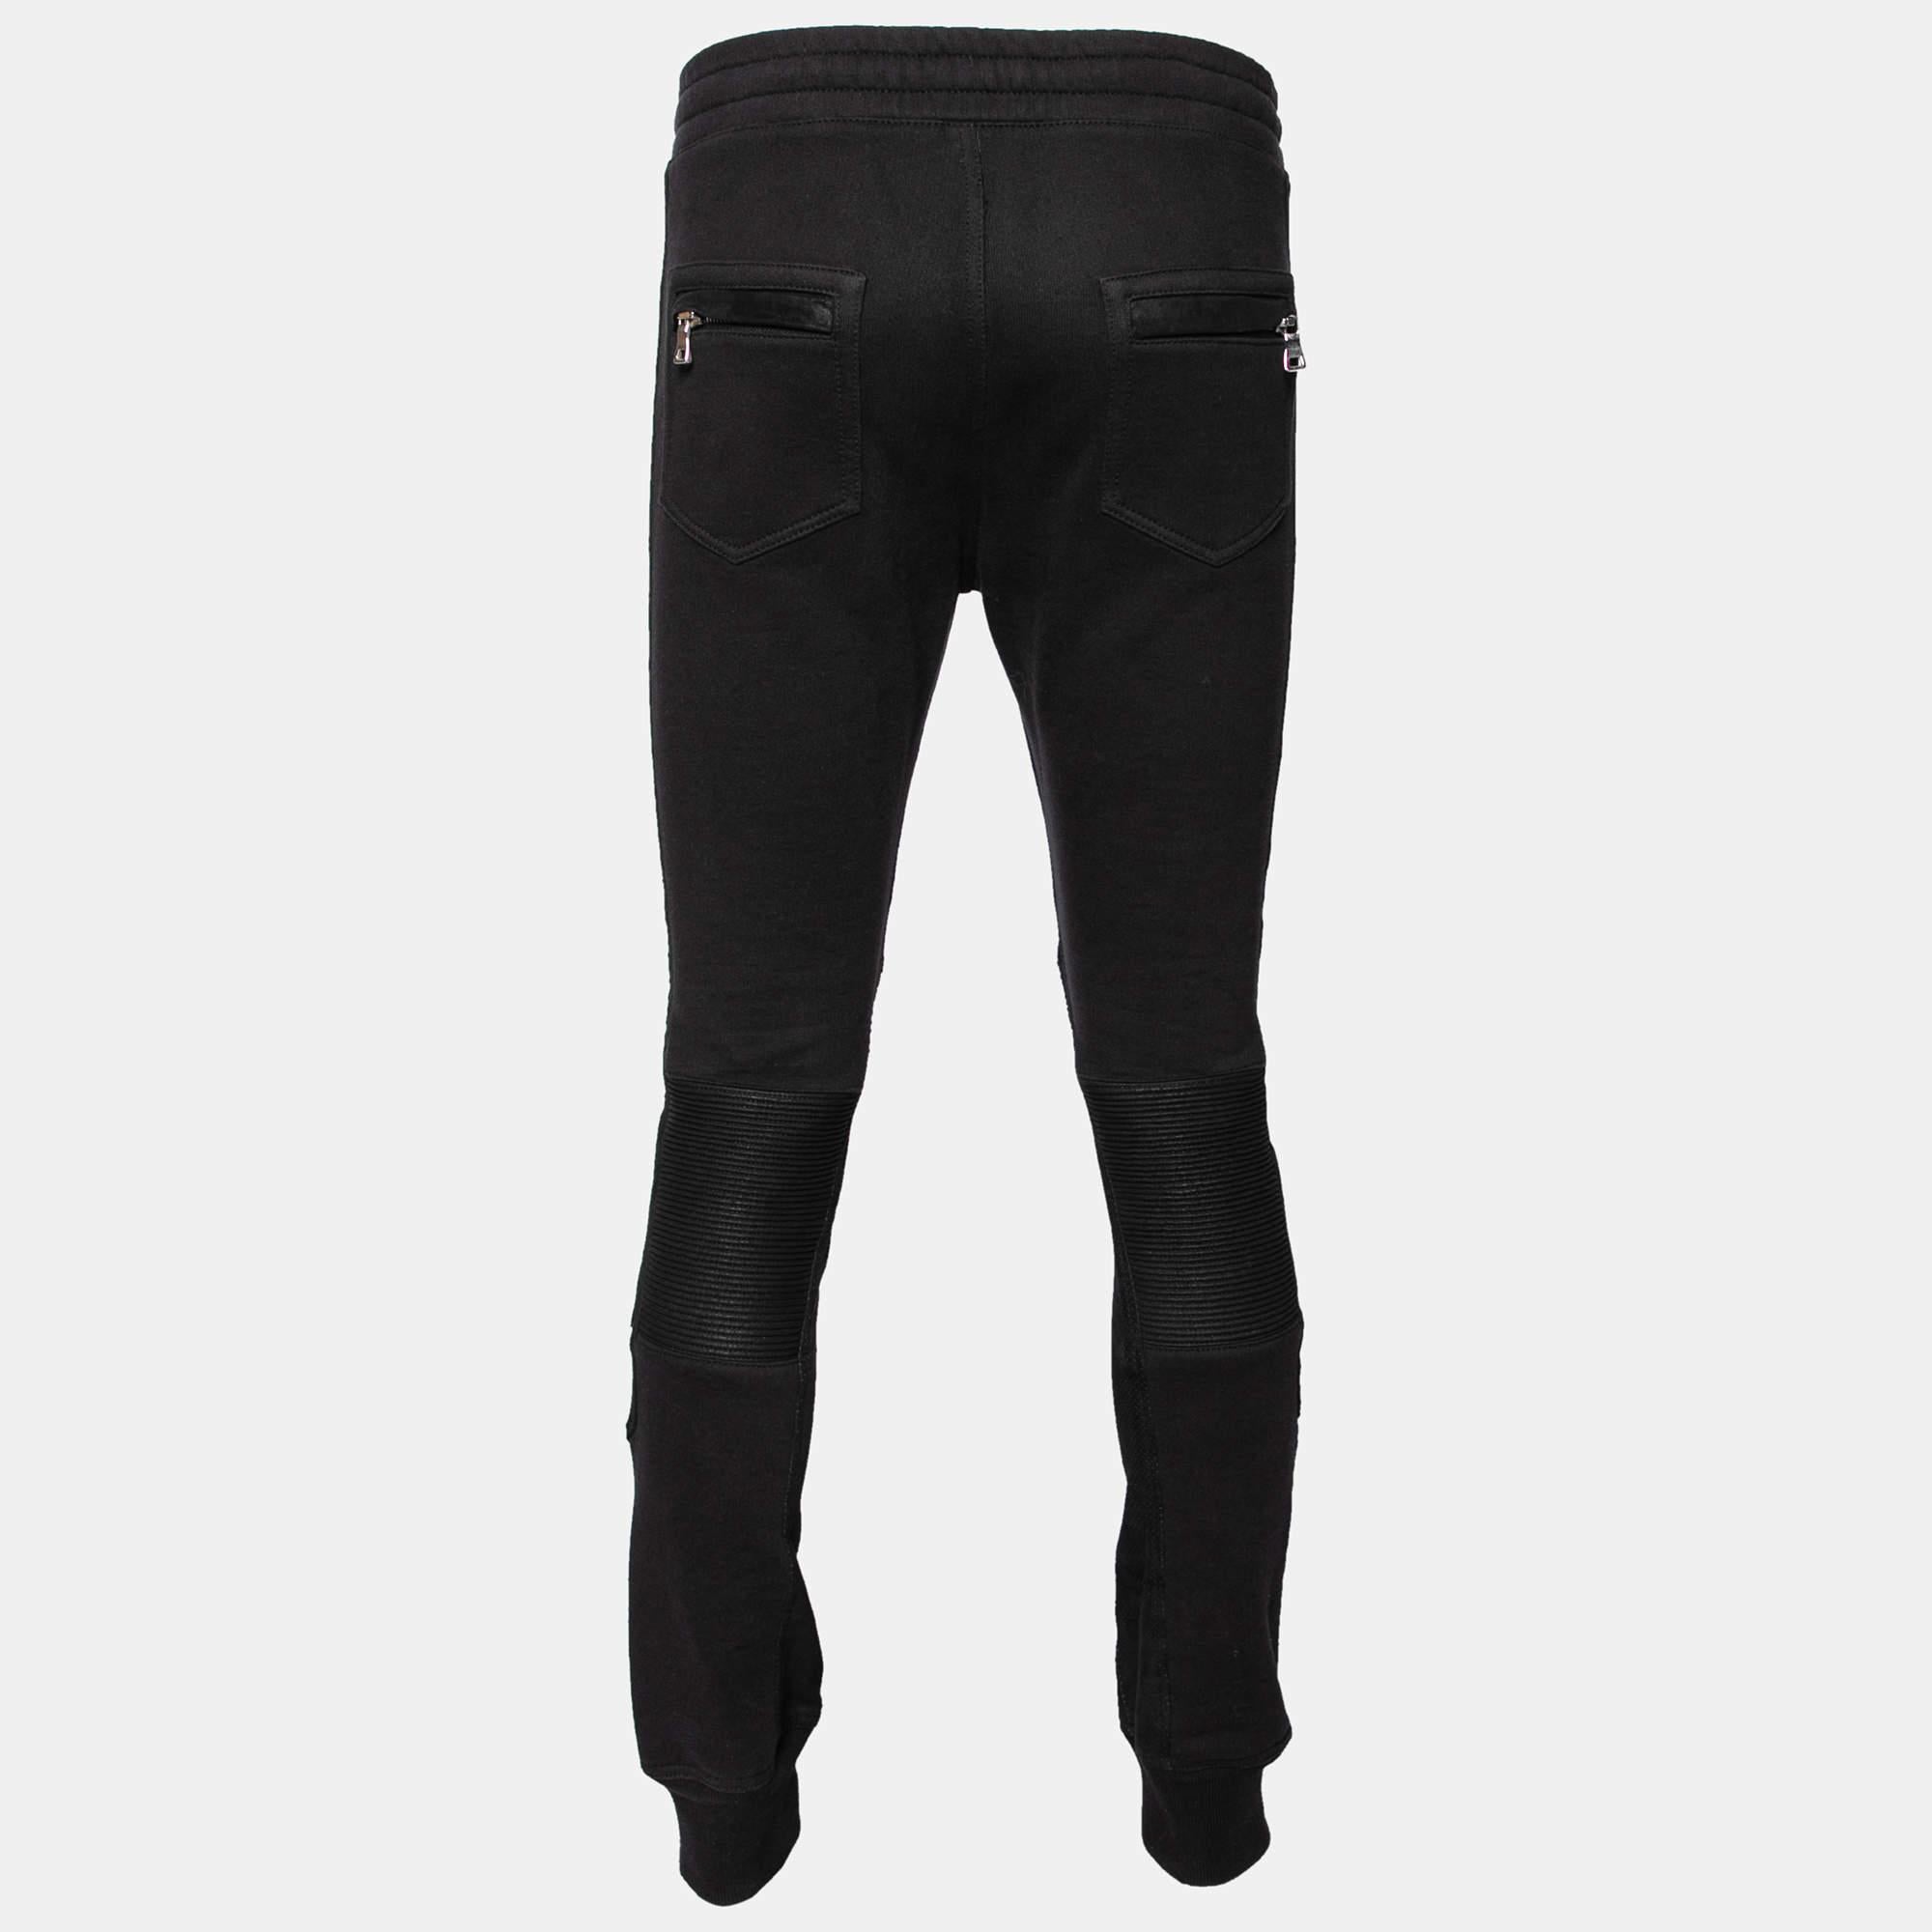 Step out for a jog with these super-stylish joggers, lounge around, or go out to run errands, the Balmain creation will make you feel comfortable all day. It has been made using high-grade materials and will go well with sneakers, t-shirts, or